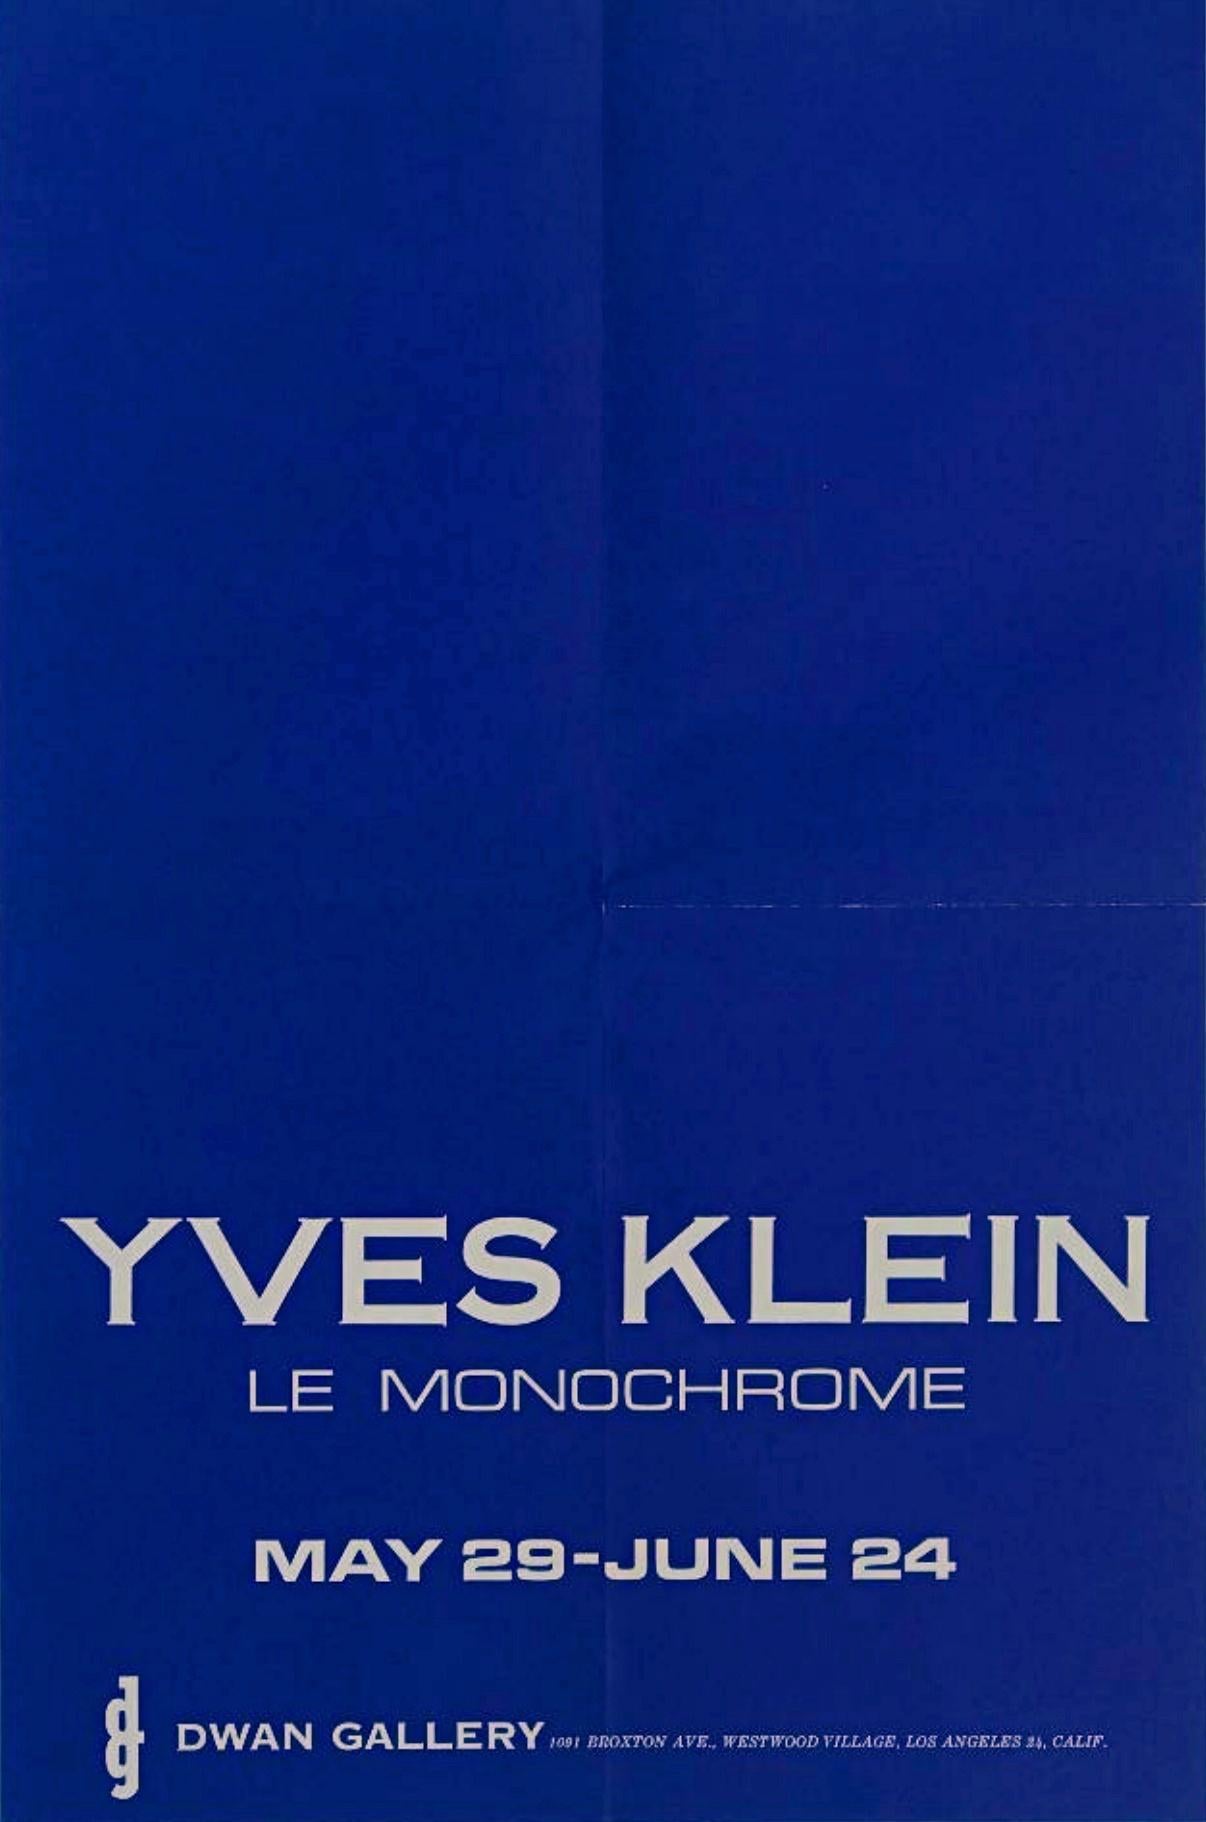 What's inside the Yves Klein table?